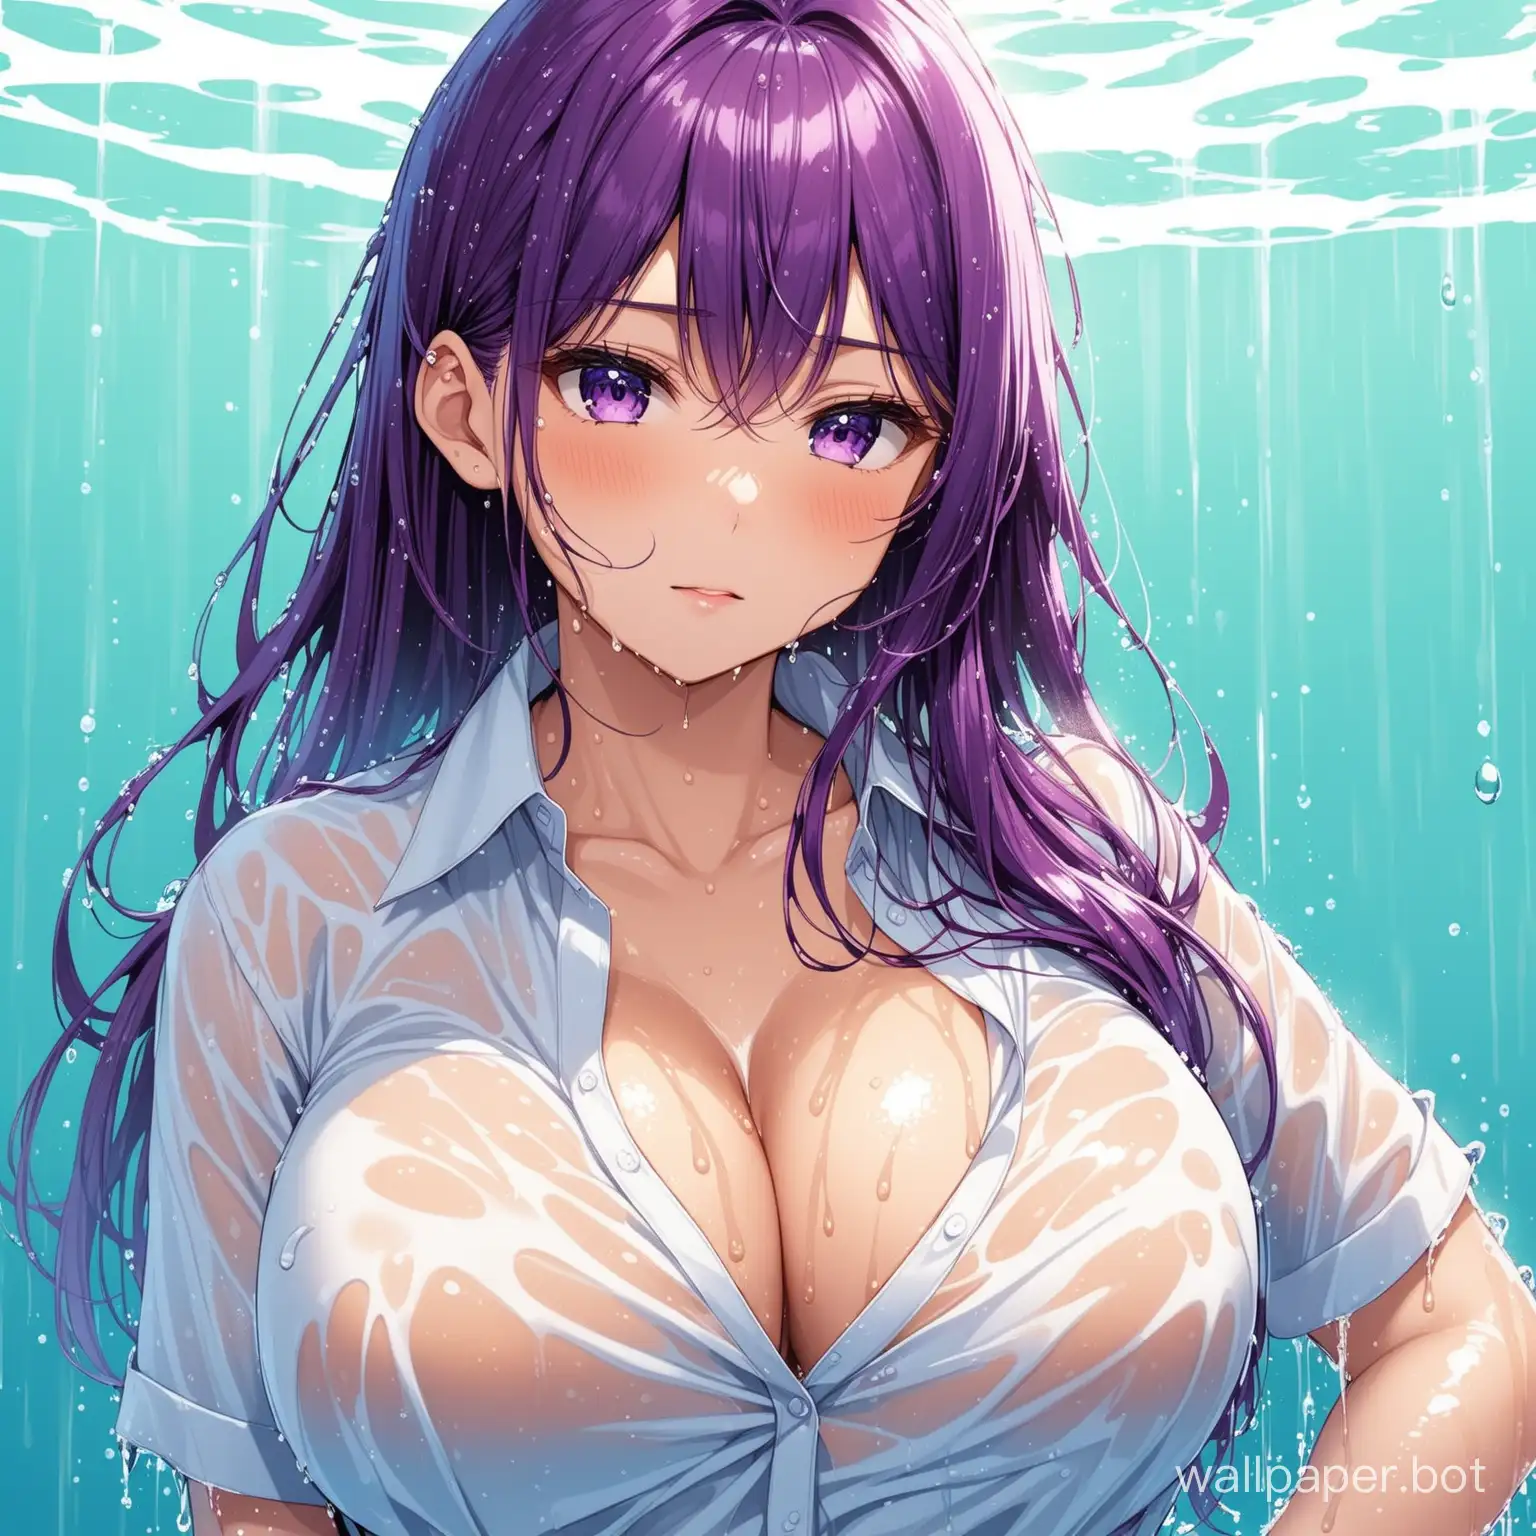 Wet-PurpleHaired-Girl-in-a-Vibrant-Shirt-with-Emphasized-Chest